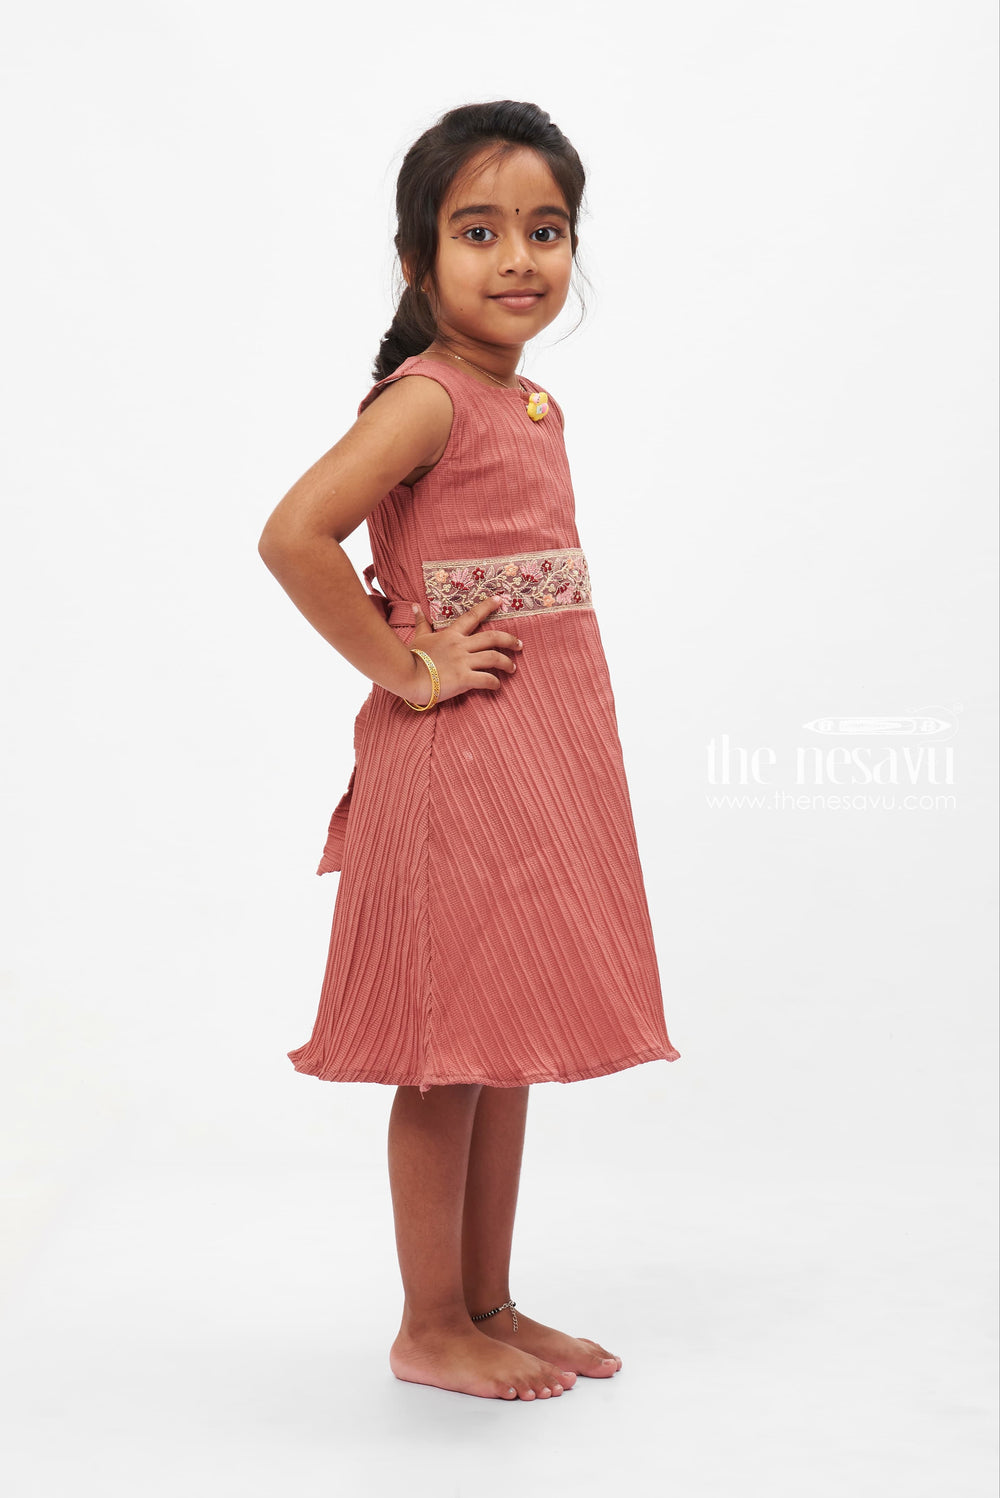 The Nesavu Girls Fancy Frock Coral Charm Pleated Dress: Sleeveless Delight with Floral Brooch for Girls Nesavu Girls' Coral Pleated Dress with Floral Brooch | Vibrant Party Wear | The Nesavu